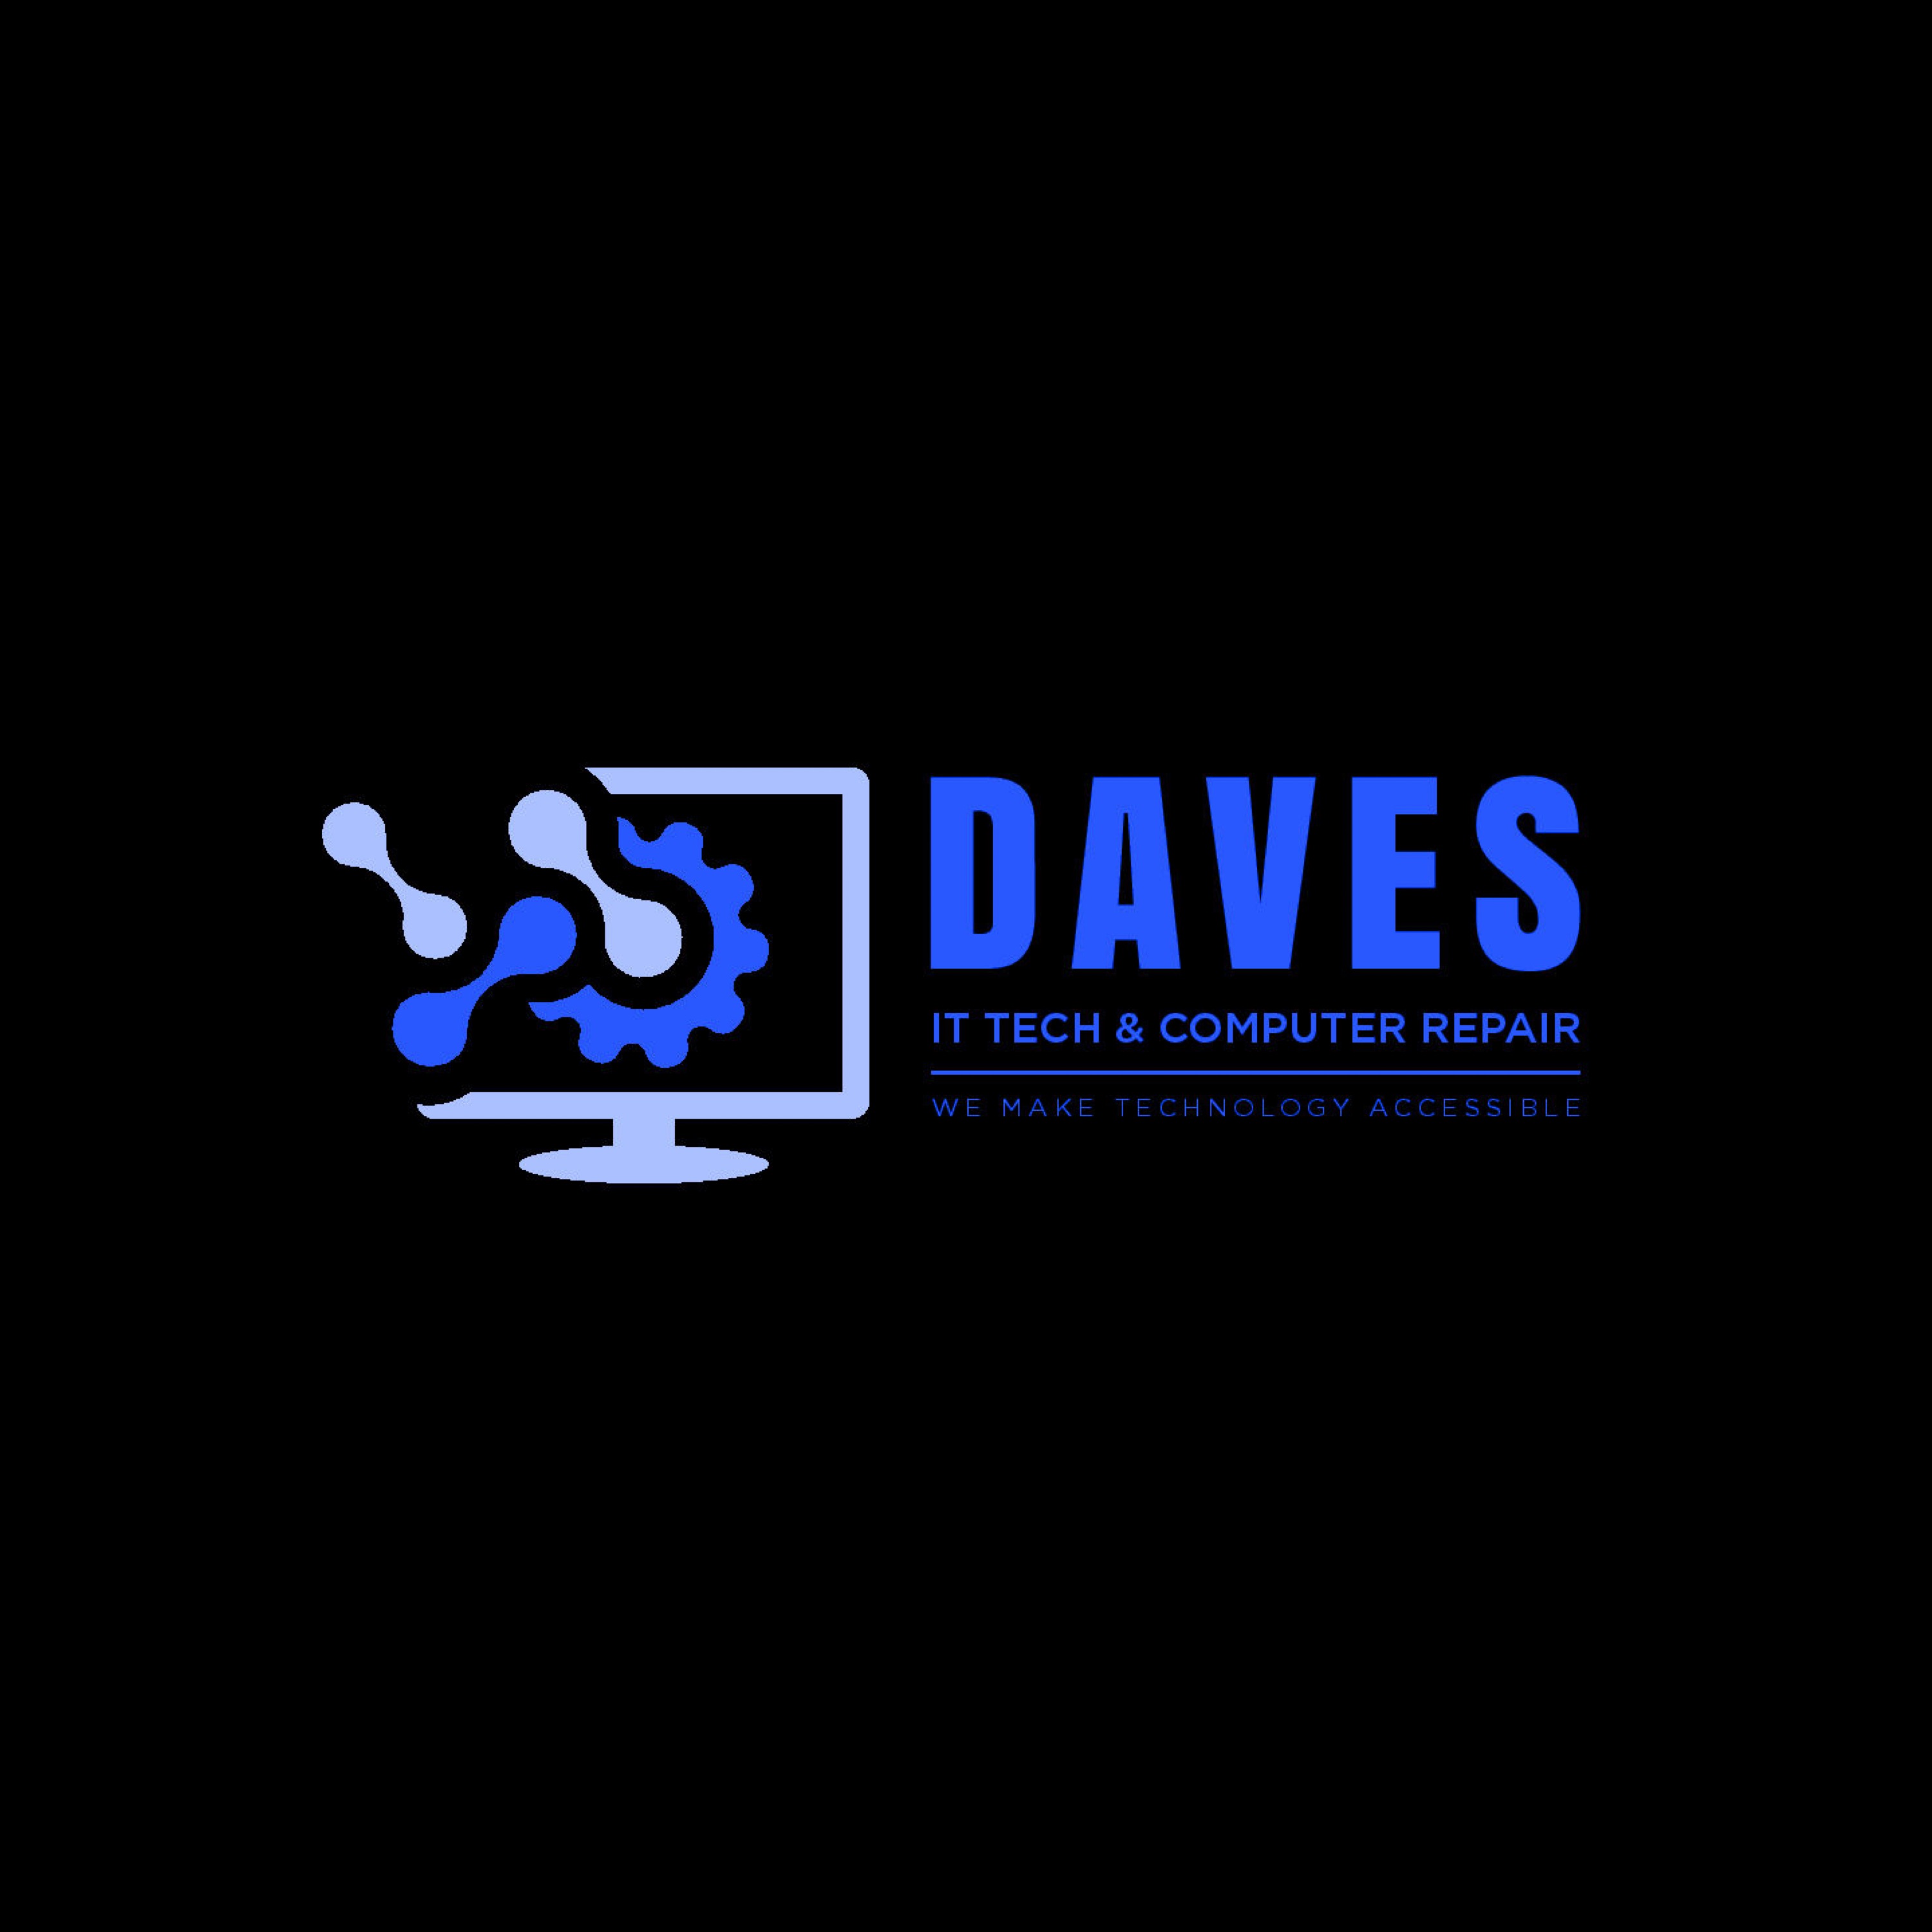 Dave's IT Tech and Computer Repair - Unlicensed Contractor Logo